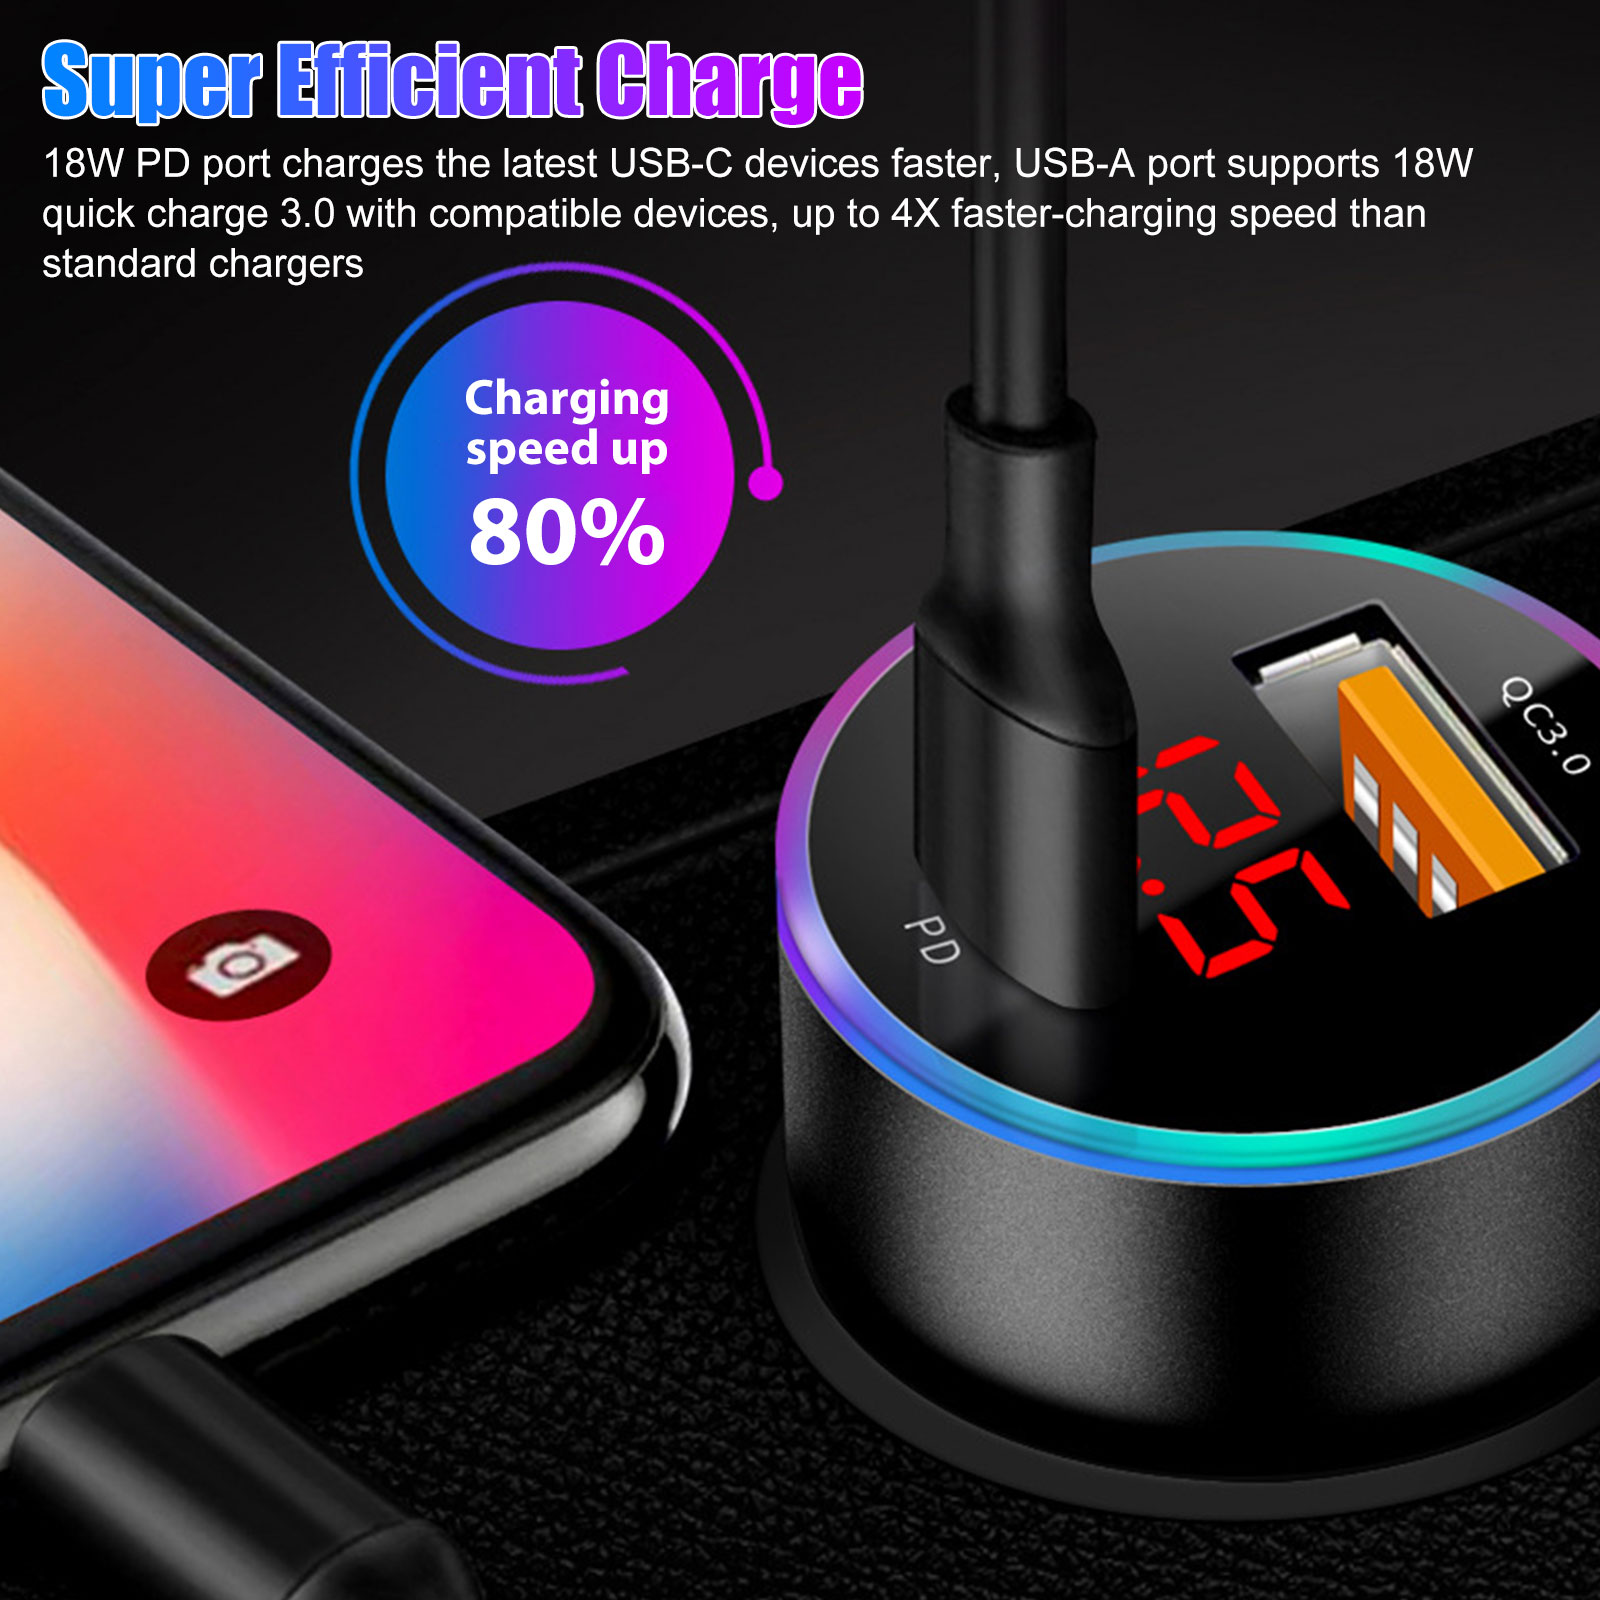 TSV USB C Car Charger, 36W Fast USB Car Charger PD QC 3.0 Dual Port Car Adapter, Mini Alloy USB Charger Compatible with iPhone 12, 12 Mini, 12 Pro, 12 Pro Max, 11 Pro Max, Pixel, Samsung - image 3 of 9